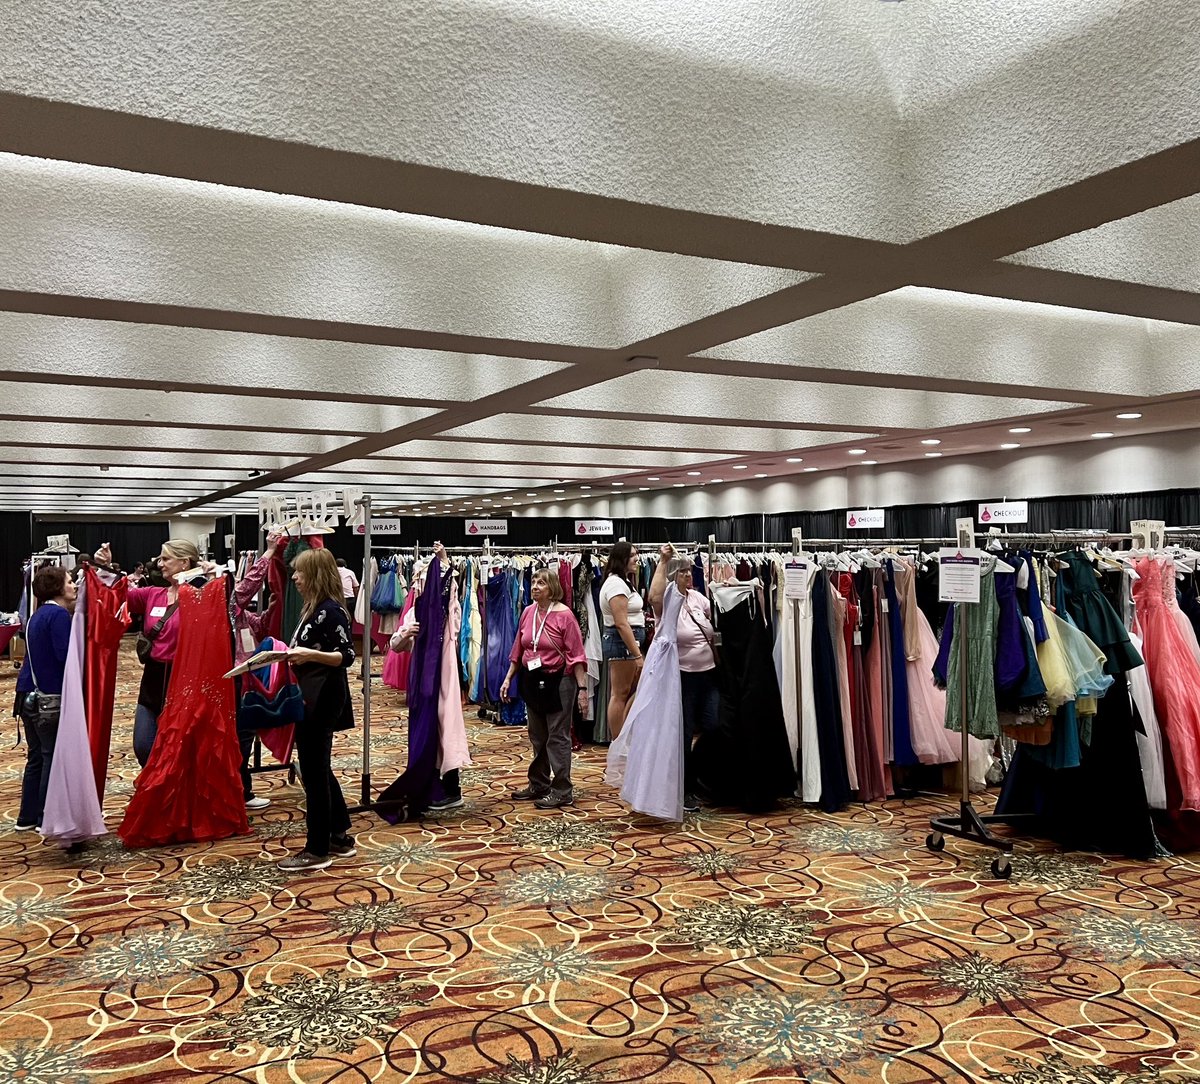 Gowns for Prom 2024 ✨👗👠 Hundreds of WNY students have been making their way to the @BFLOconvention to select a prom gown at NO COST! If you know someone who needs a gown, encourage them to sign up for a time slot at gownsforprom.com! #buffalony #promseason #prom